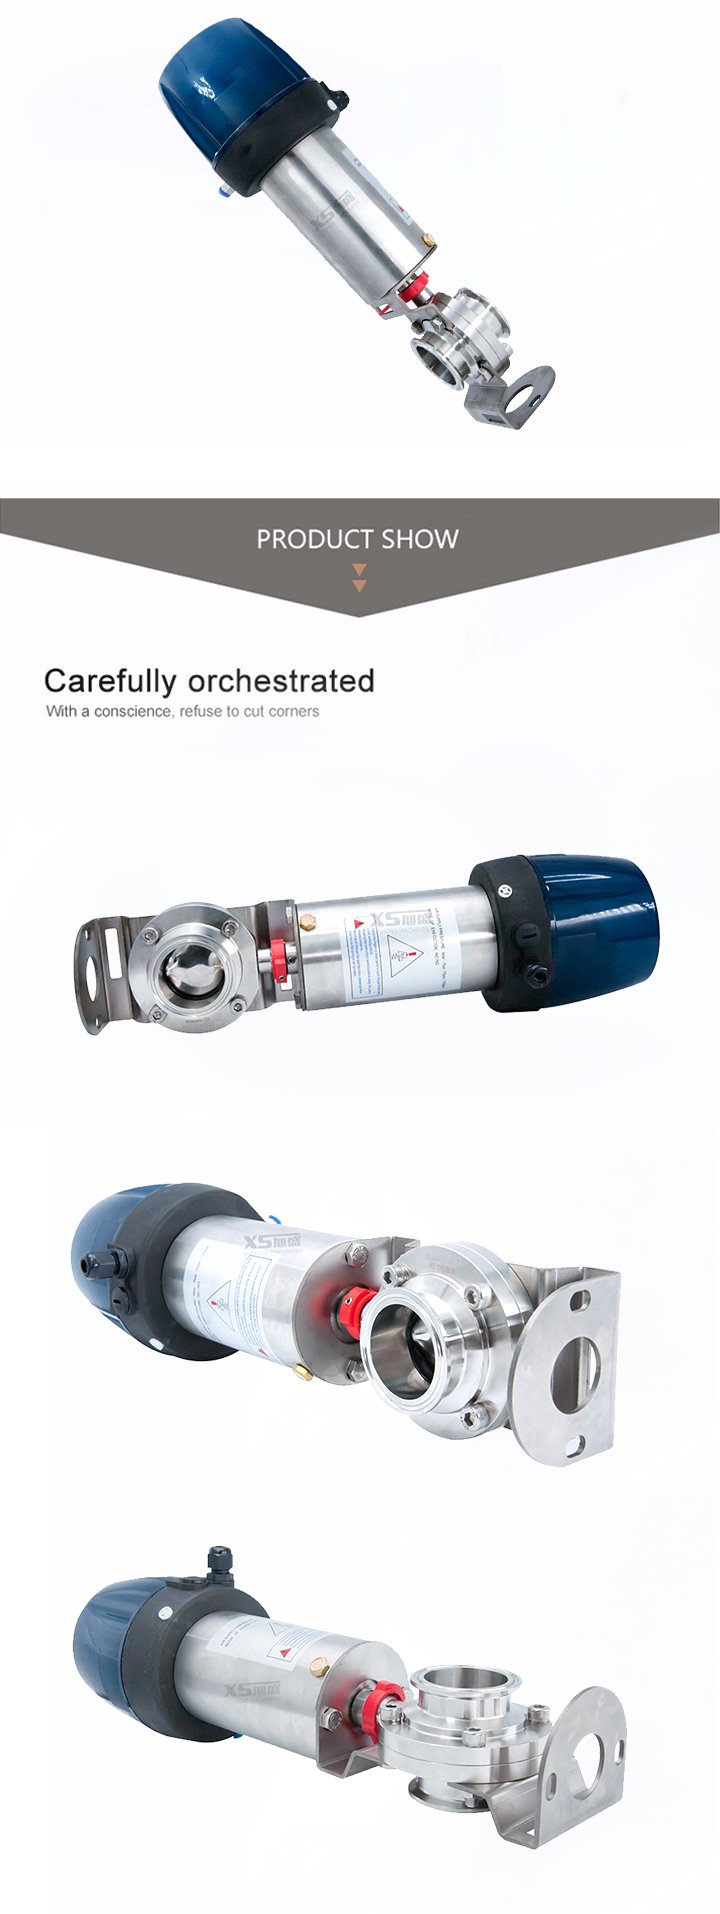 Stainless Steel Sanitary Hygienic Pneumatic Butterfly Valve with Intelligent Head